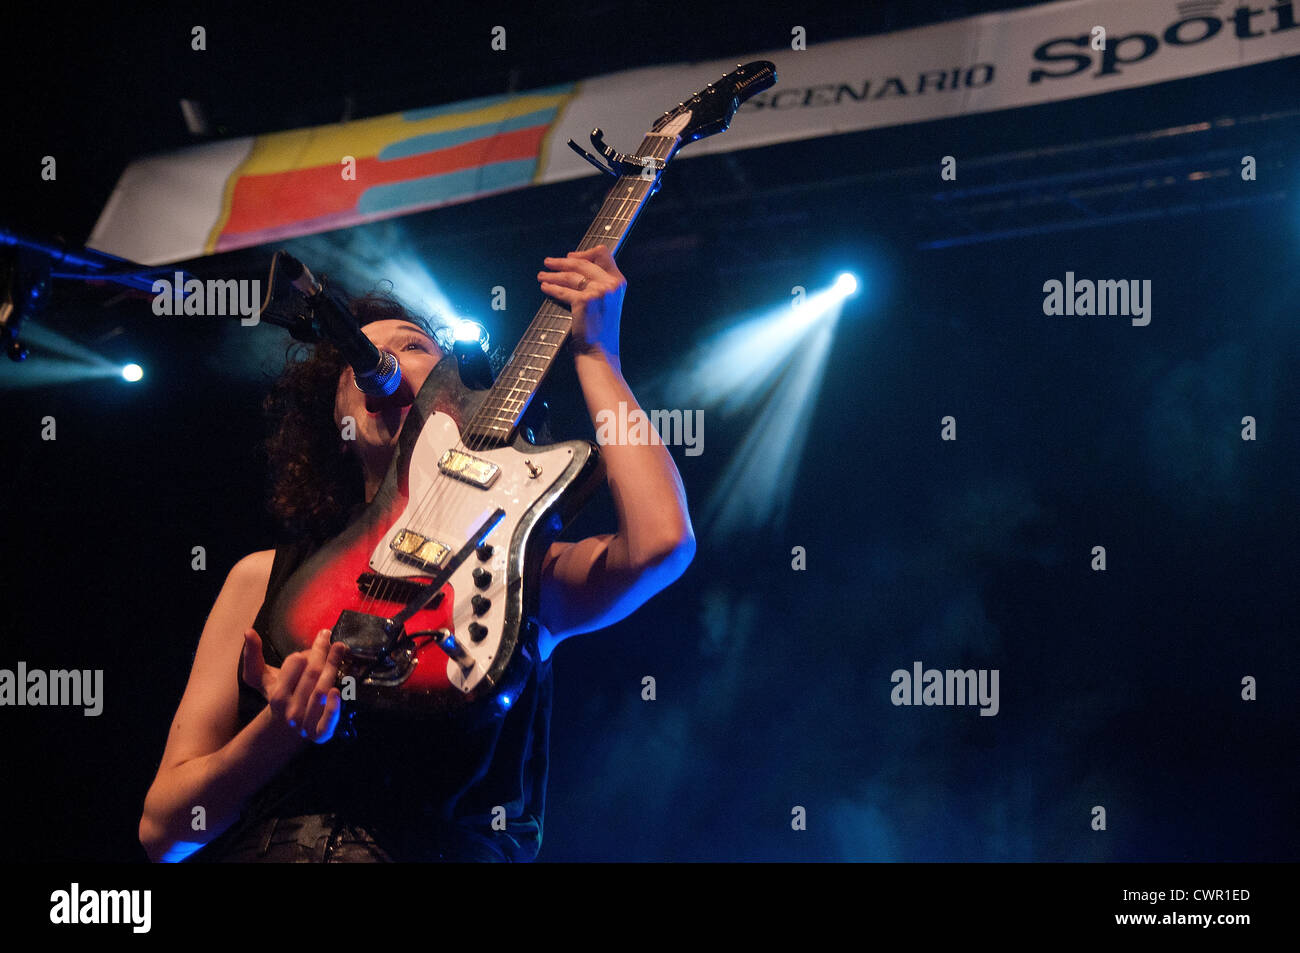 MADRID, SPAIN - JUNE 22: St. Vincent band performs at Dia de la Musica Festival on June 22, 2012 in Madrid, Spain. Stock Photo